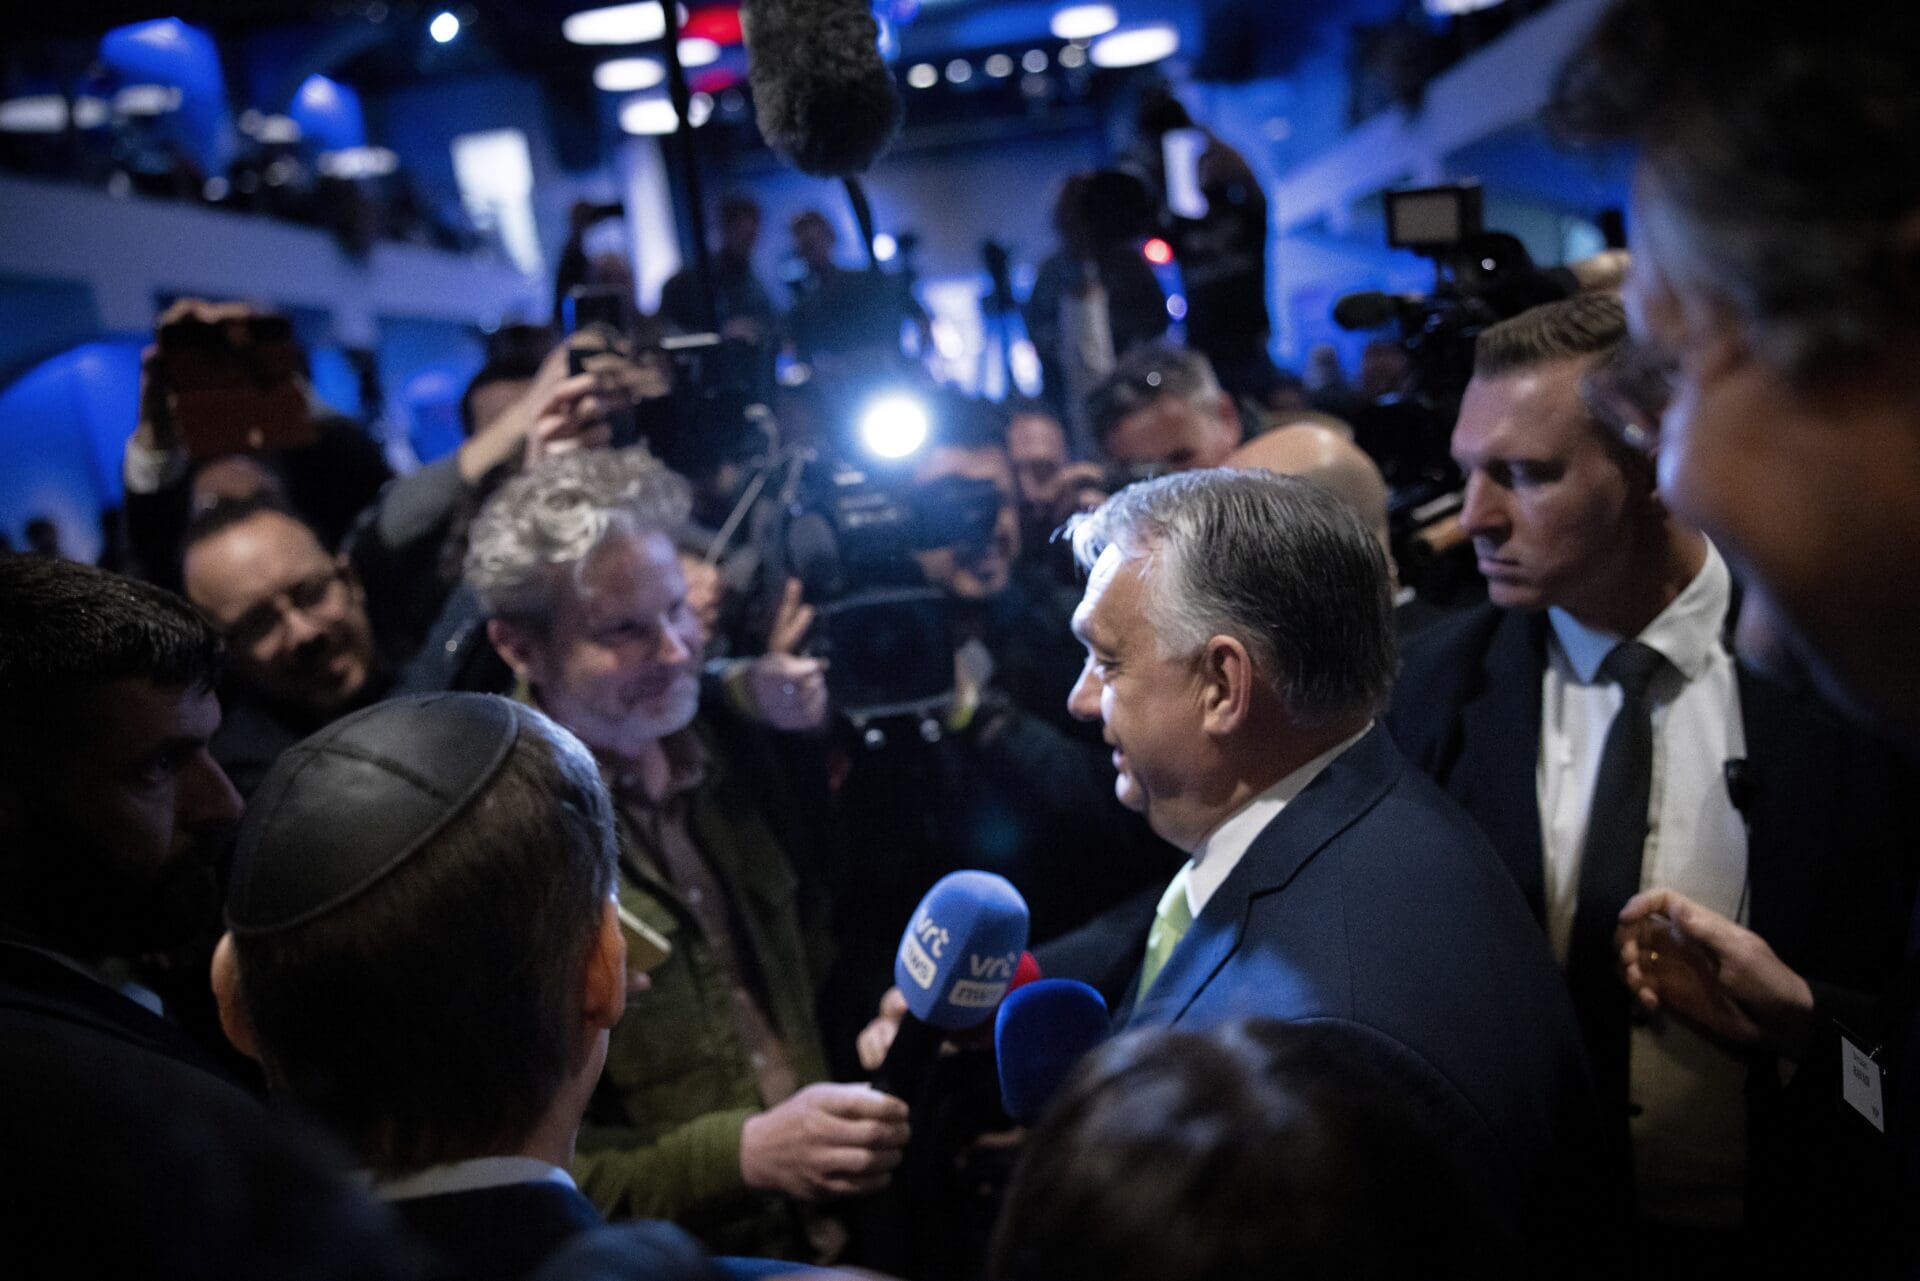 ‘Freedom fighters must once again take action in Europe’ — PM Orbán Speaks at ‘Forbidden’ NatCon Conference